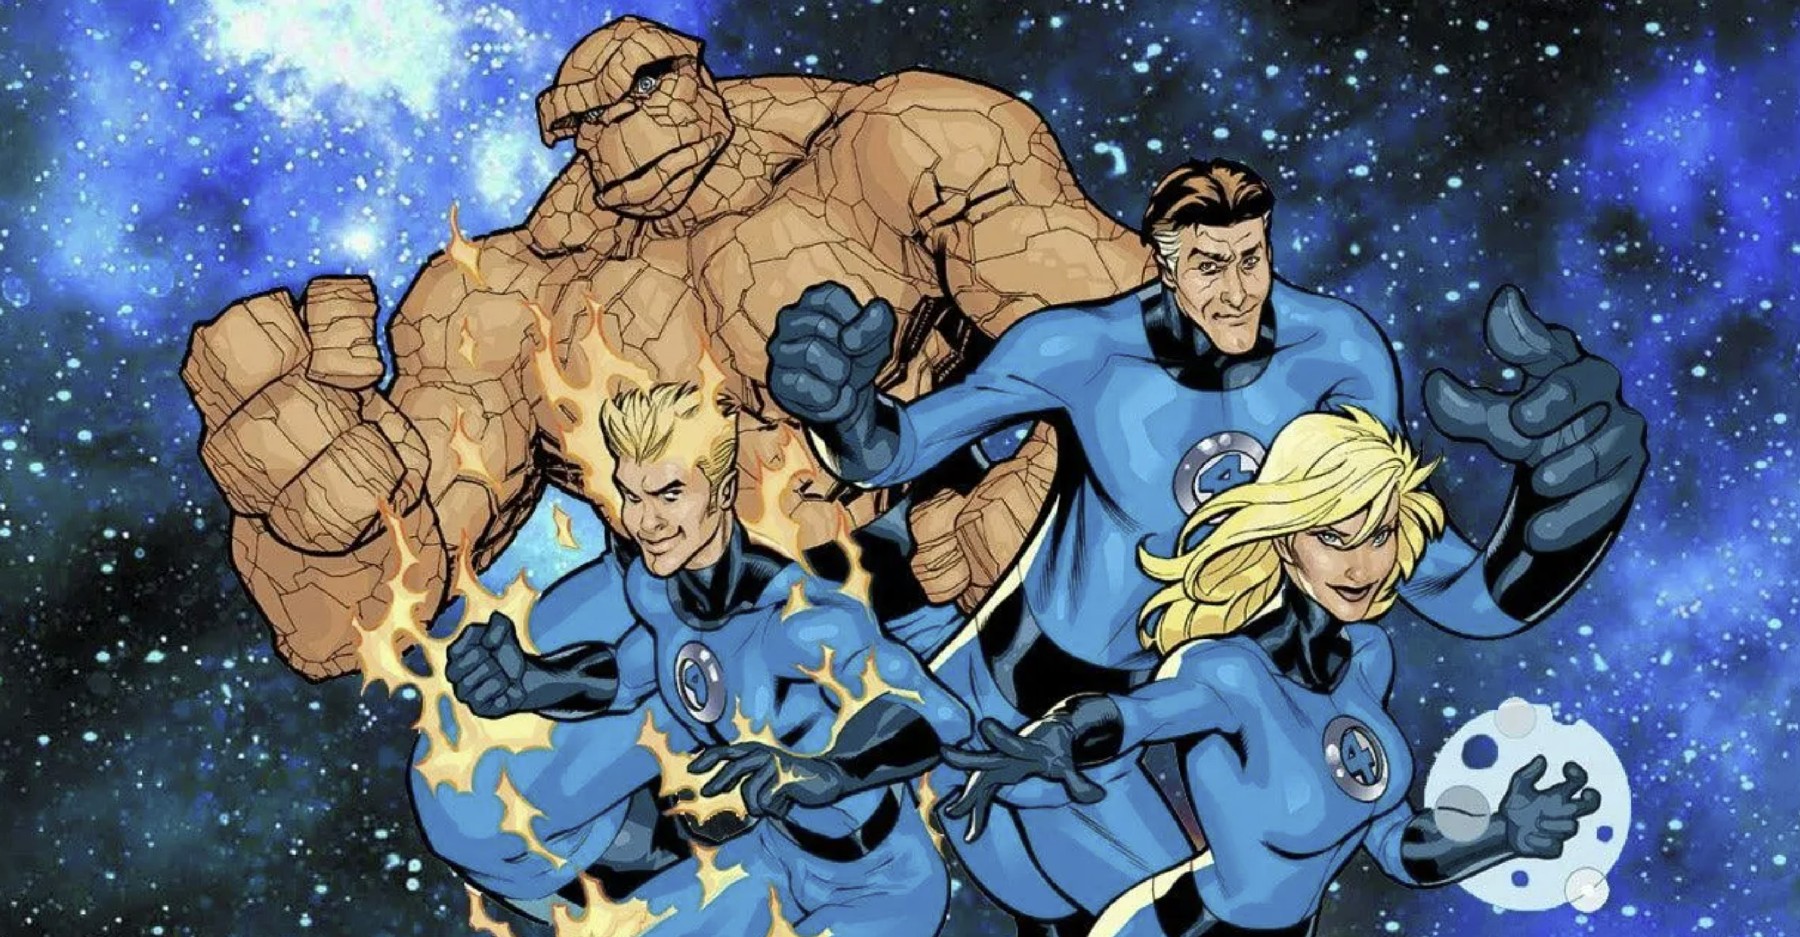 Who Should Be the Villain of Marvel's New Fantastic Four Movie